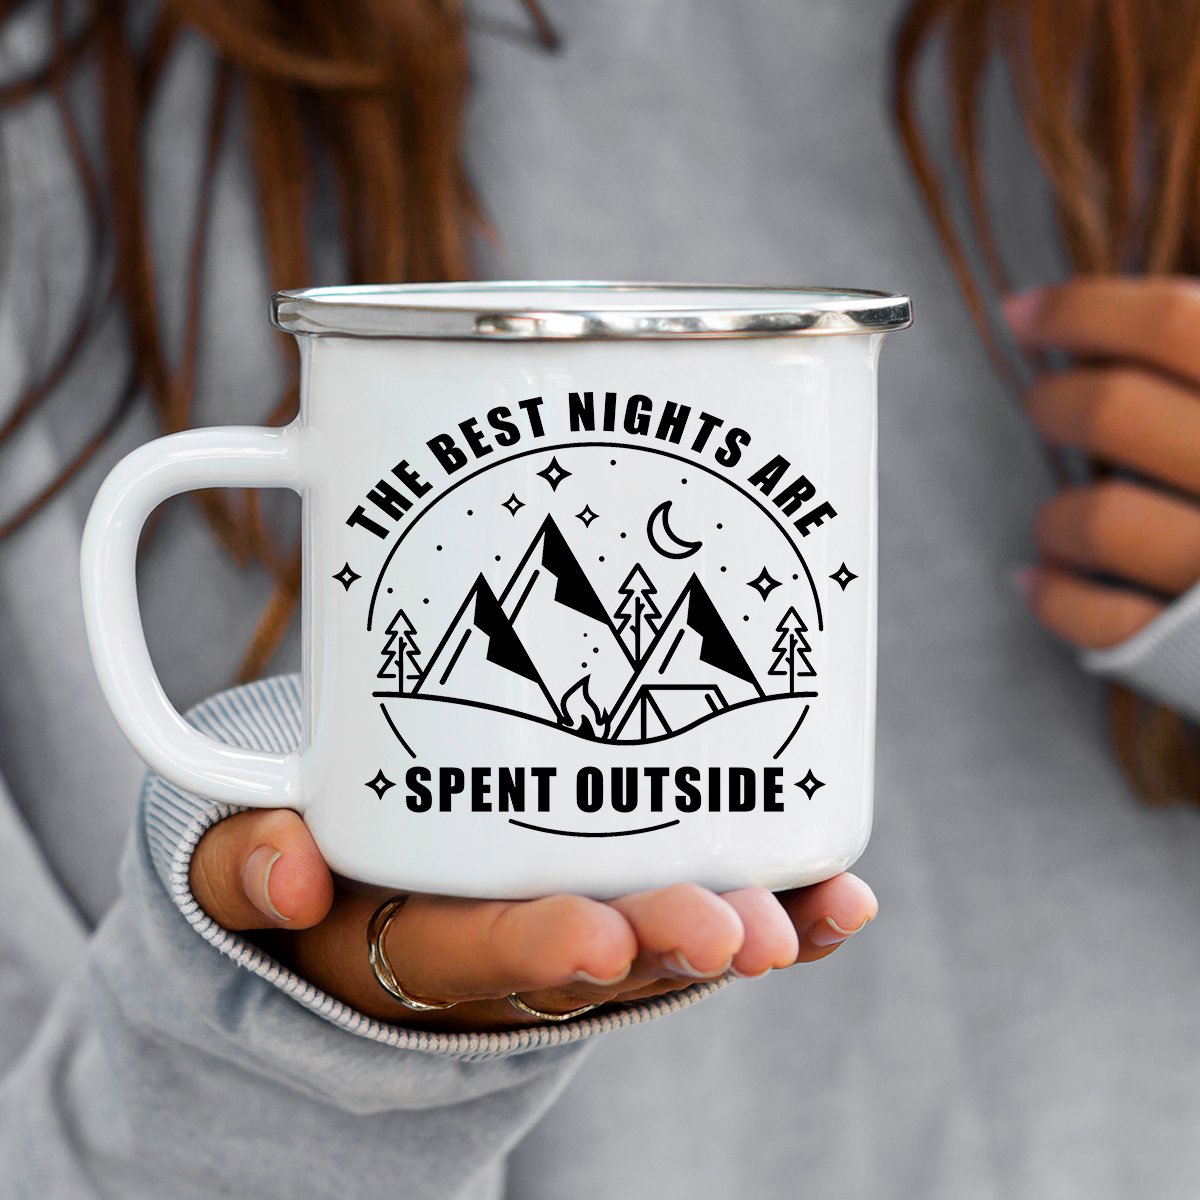 These Camp Mugs Will Keep Your Coffee Piping Hot